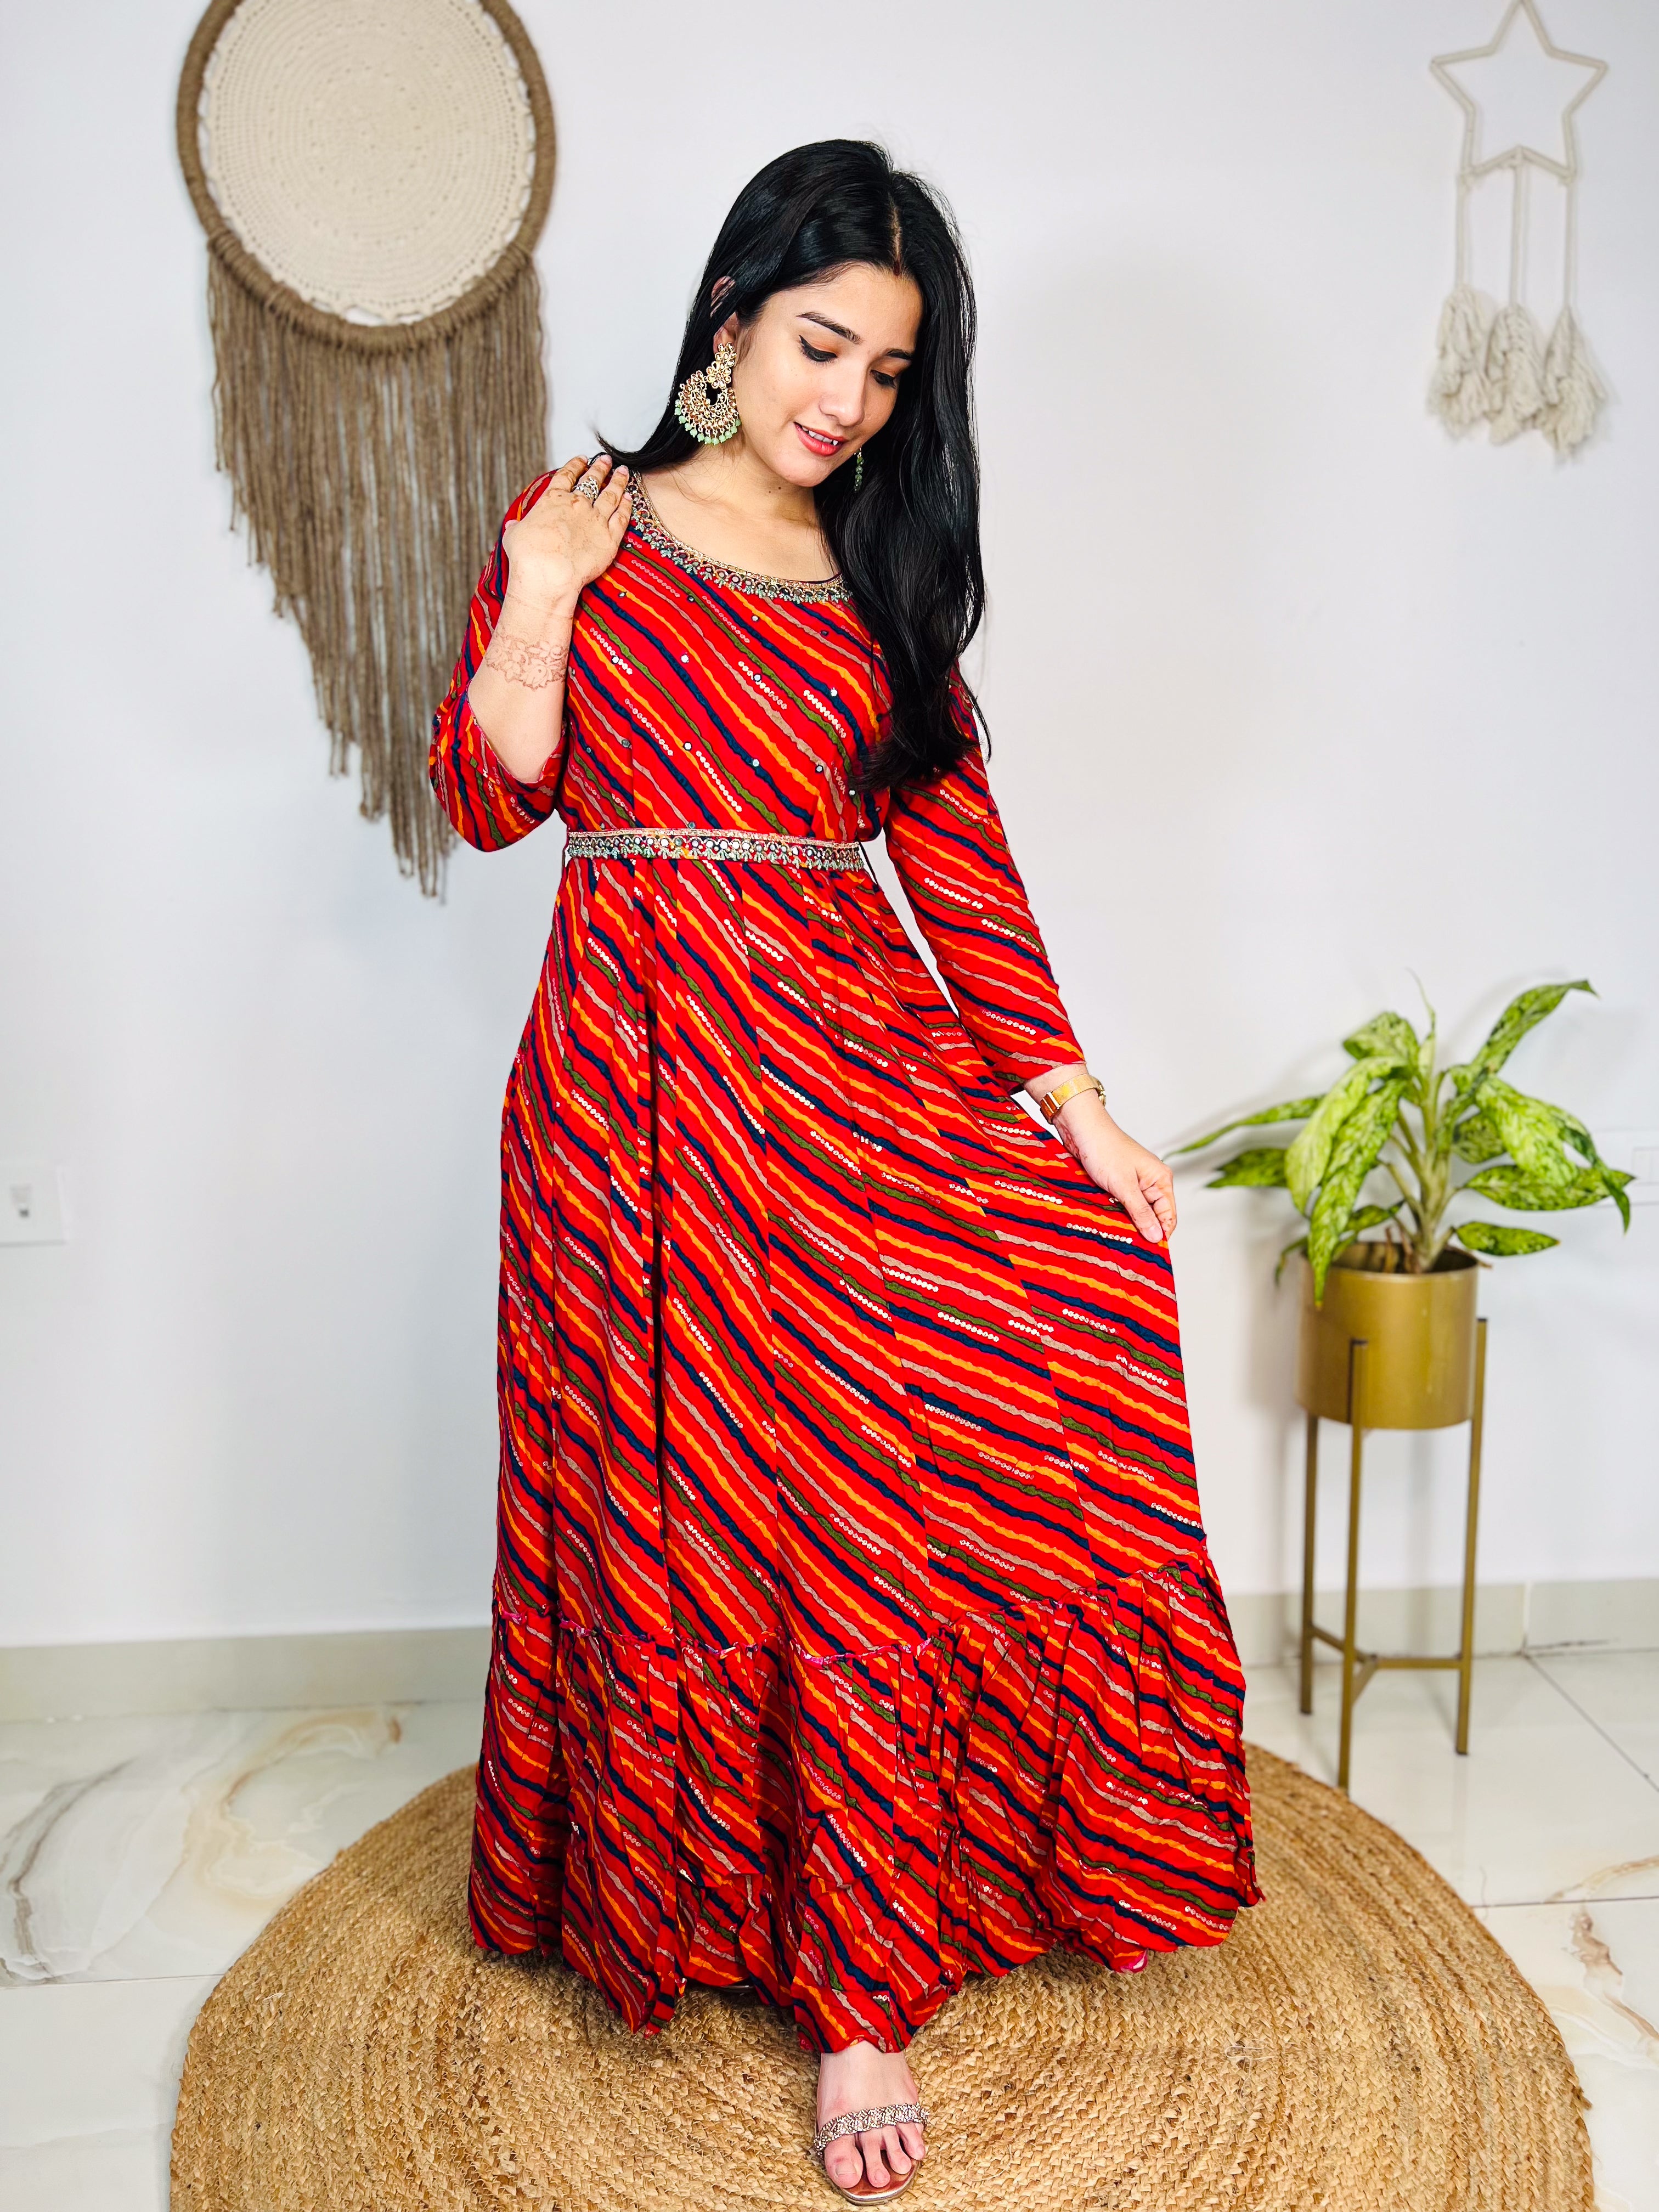 Gorgeous Sexy Red Gown Long Rayon Kurti Flare Dresses Ethnic Tunic Top  Readymade | eBay